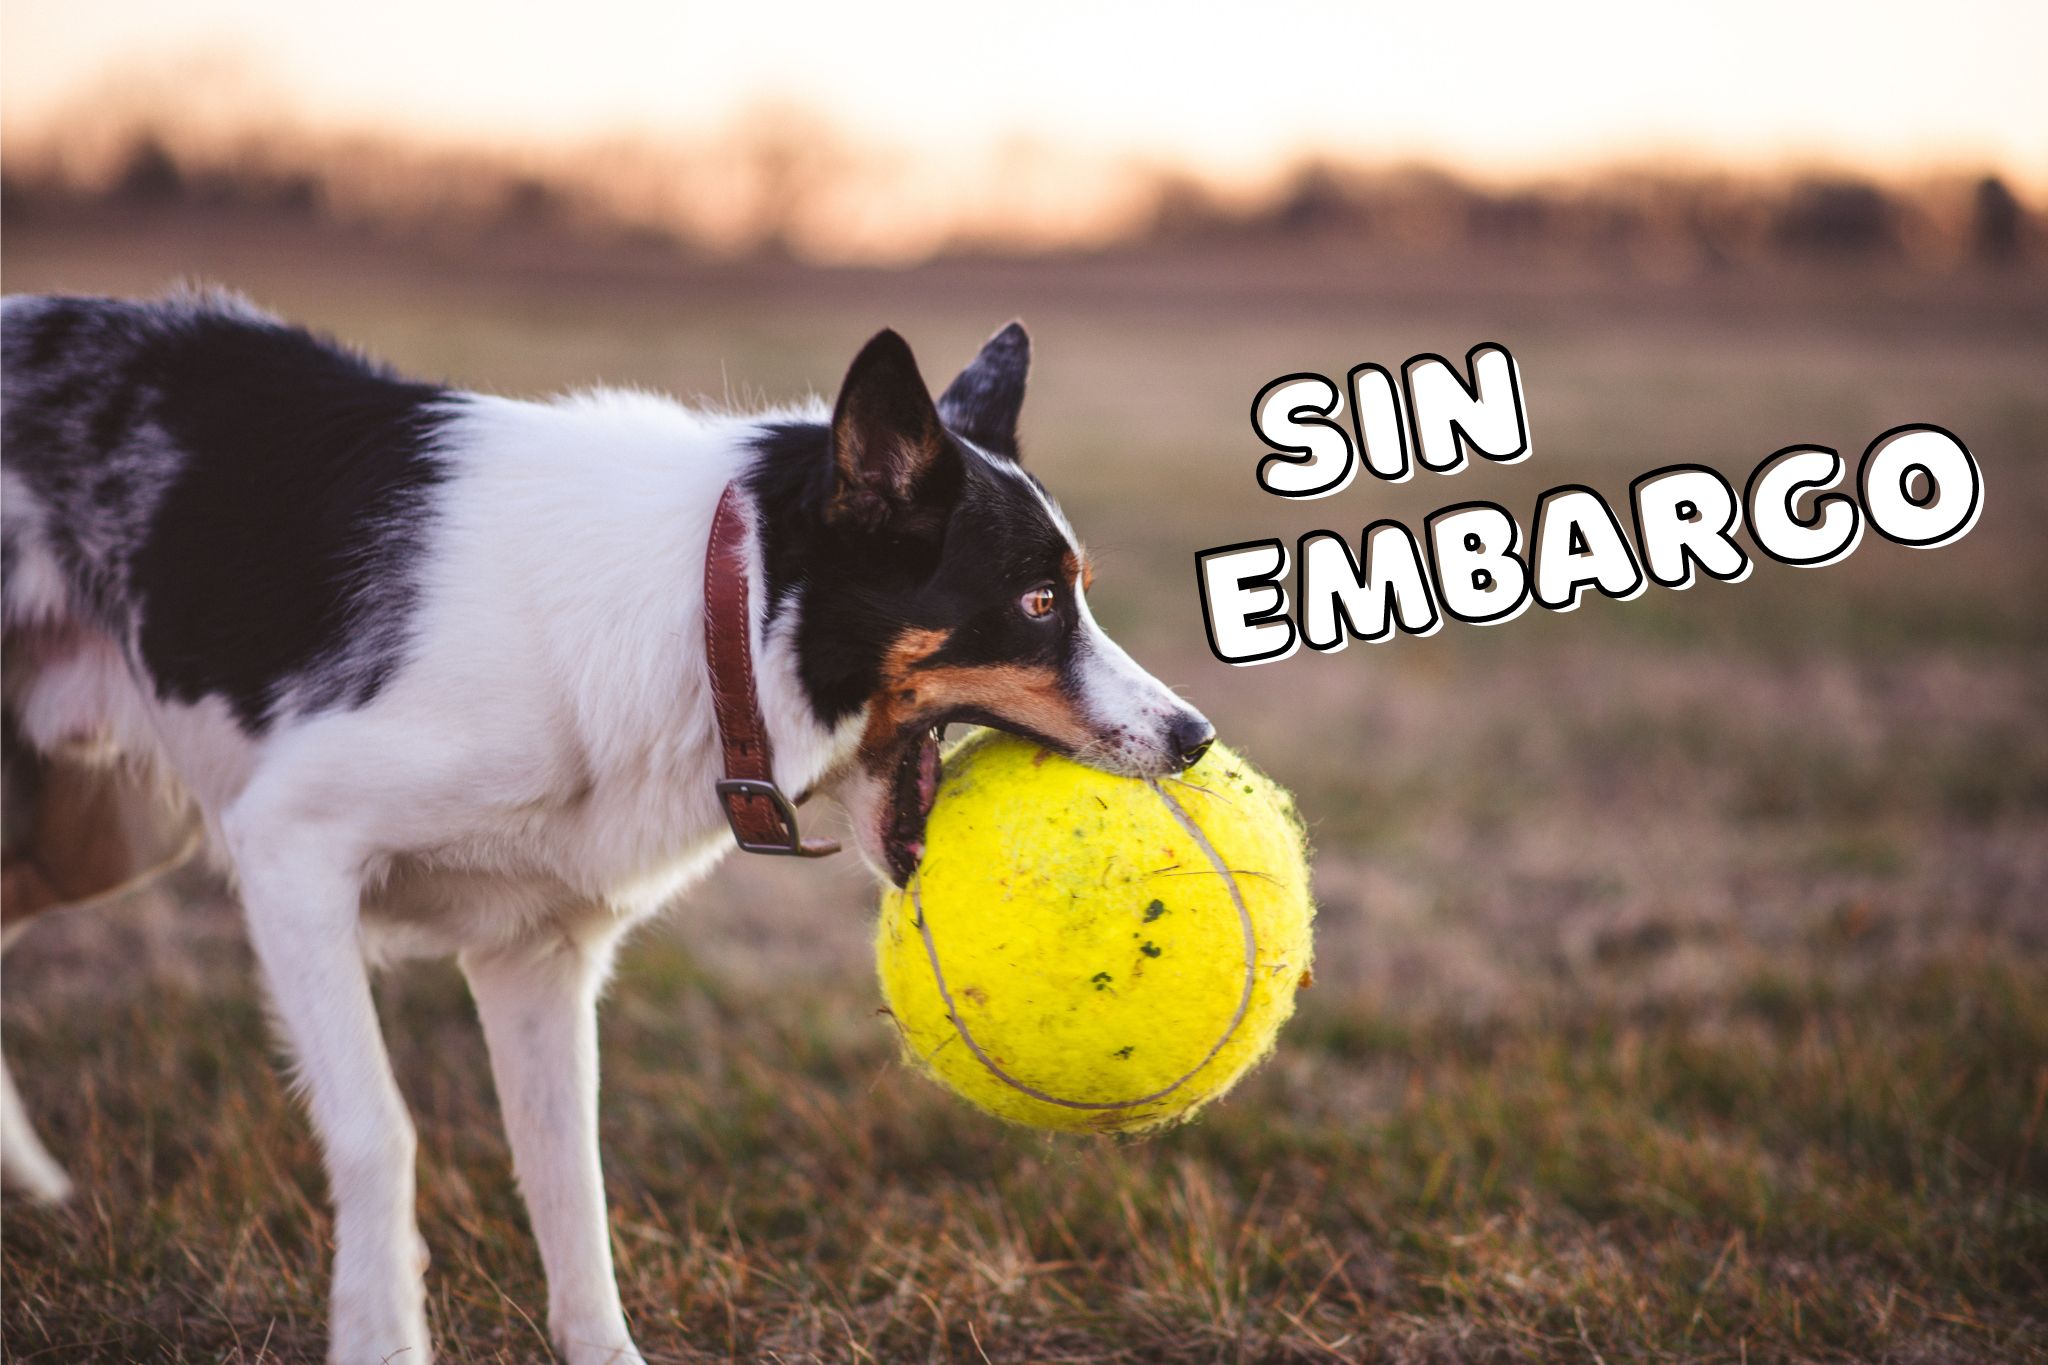 This dog has a ball, *however* (sin embargo in English)